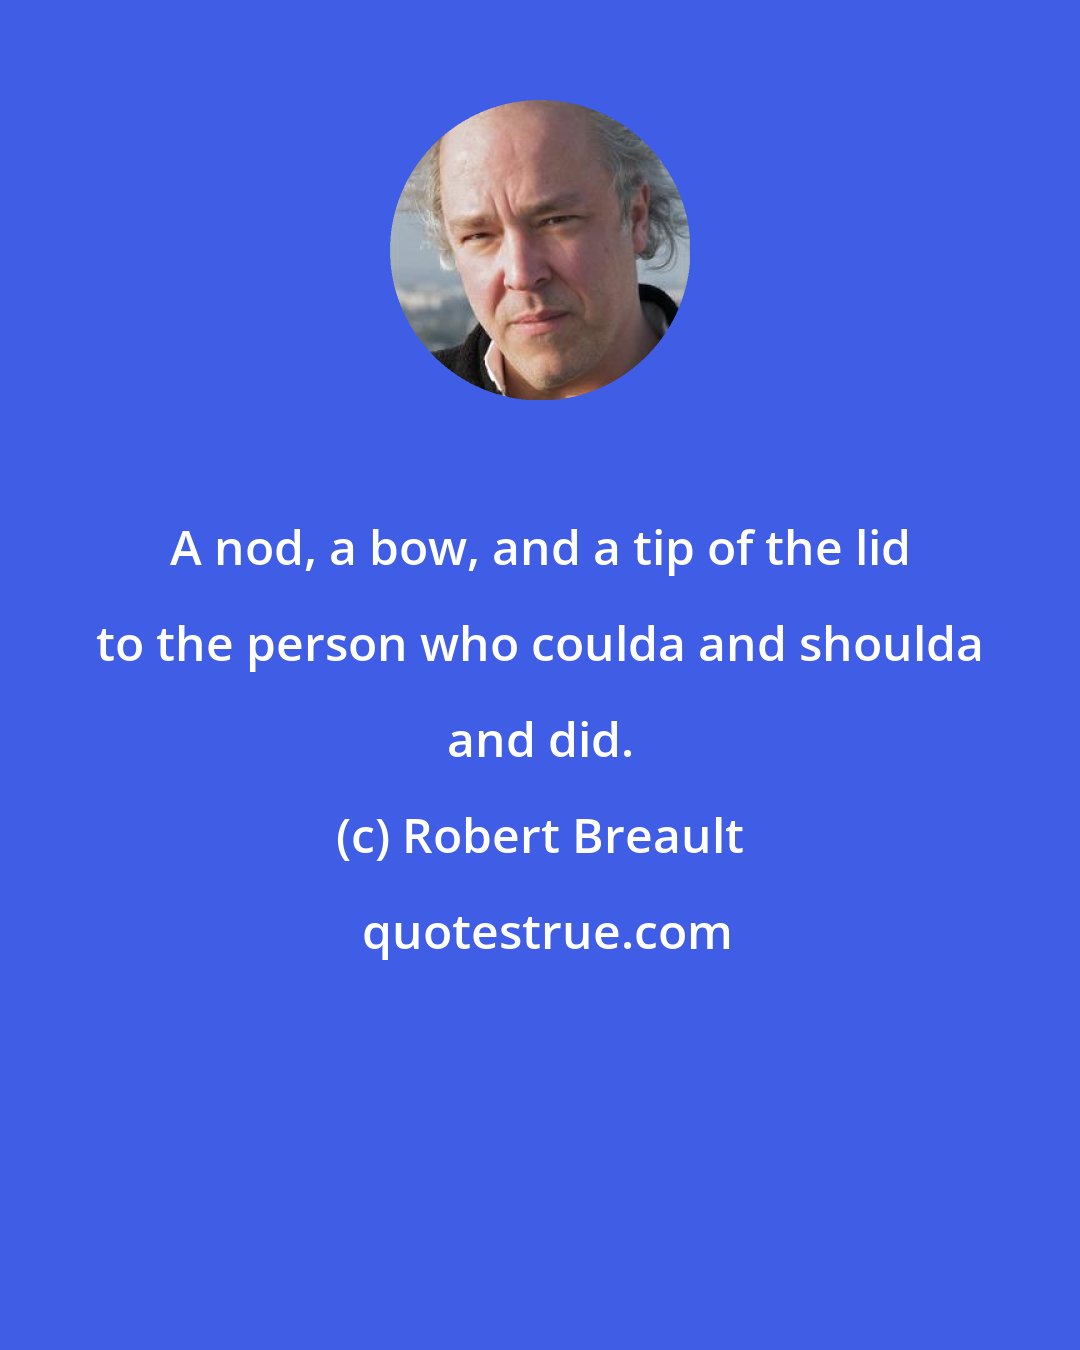 Robert Breault: A nod, a bow, and a tip of the lid to the person who coulda and shoulda and did.